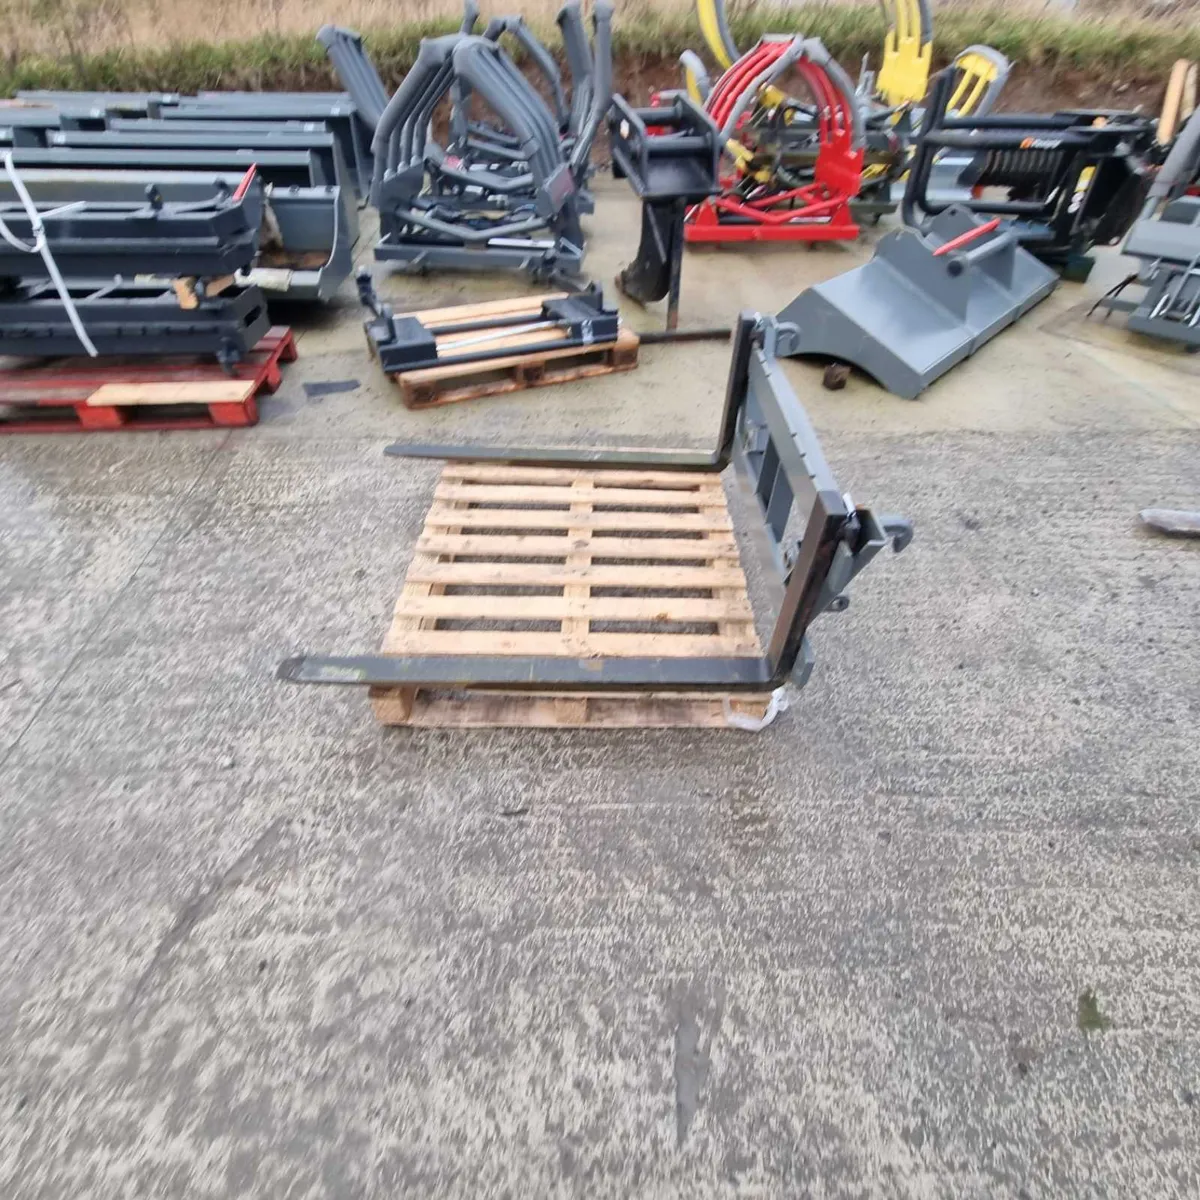 Pallet forks with Euro linkage SALE - Image 1